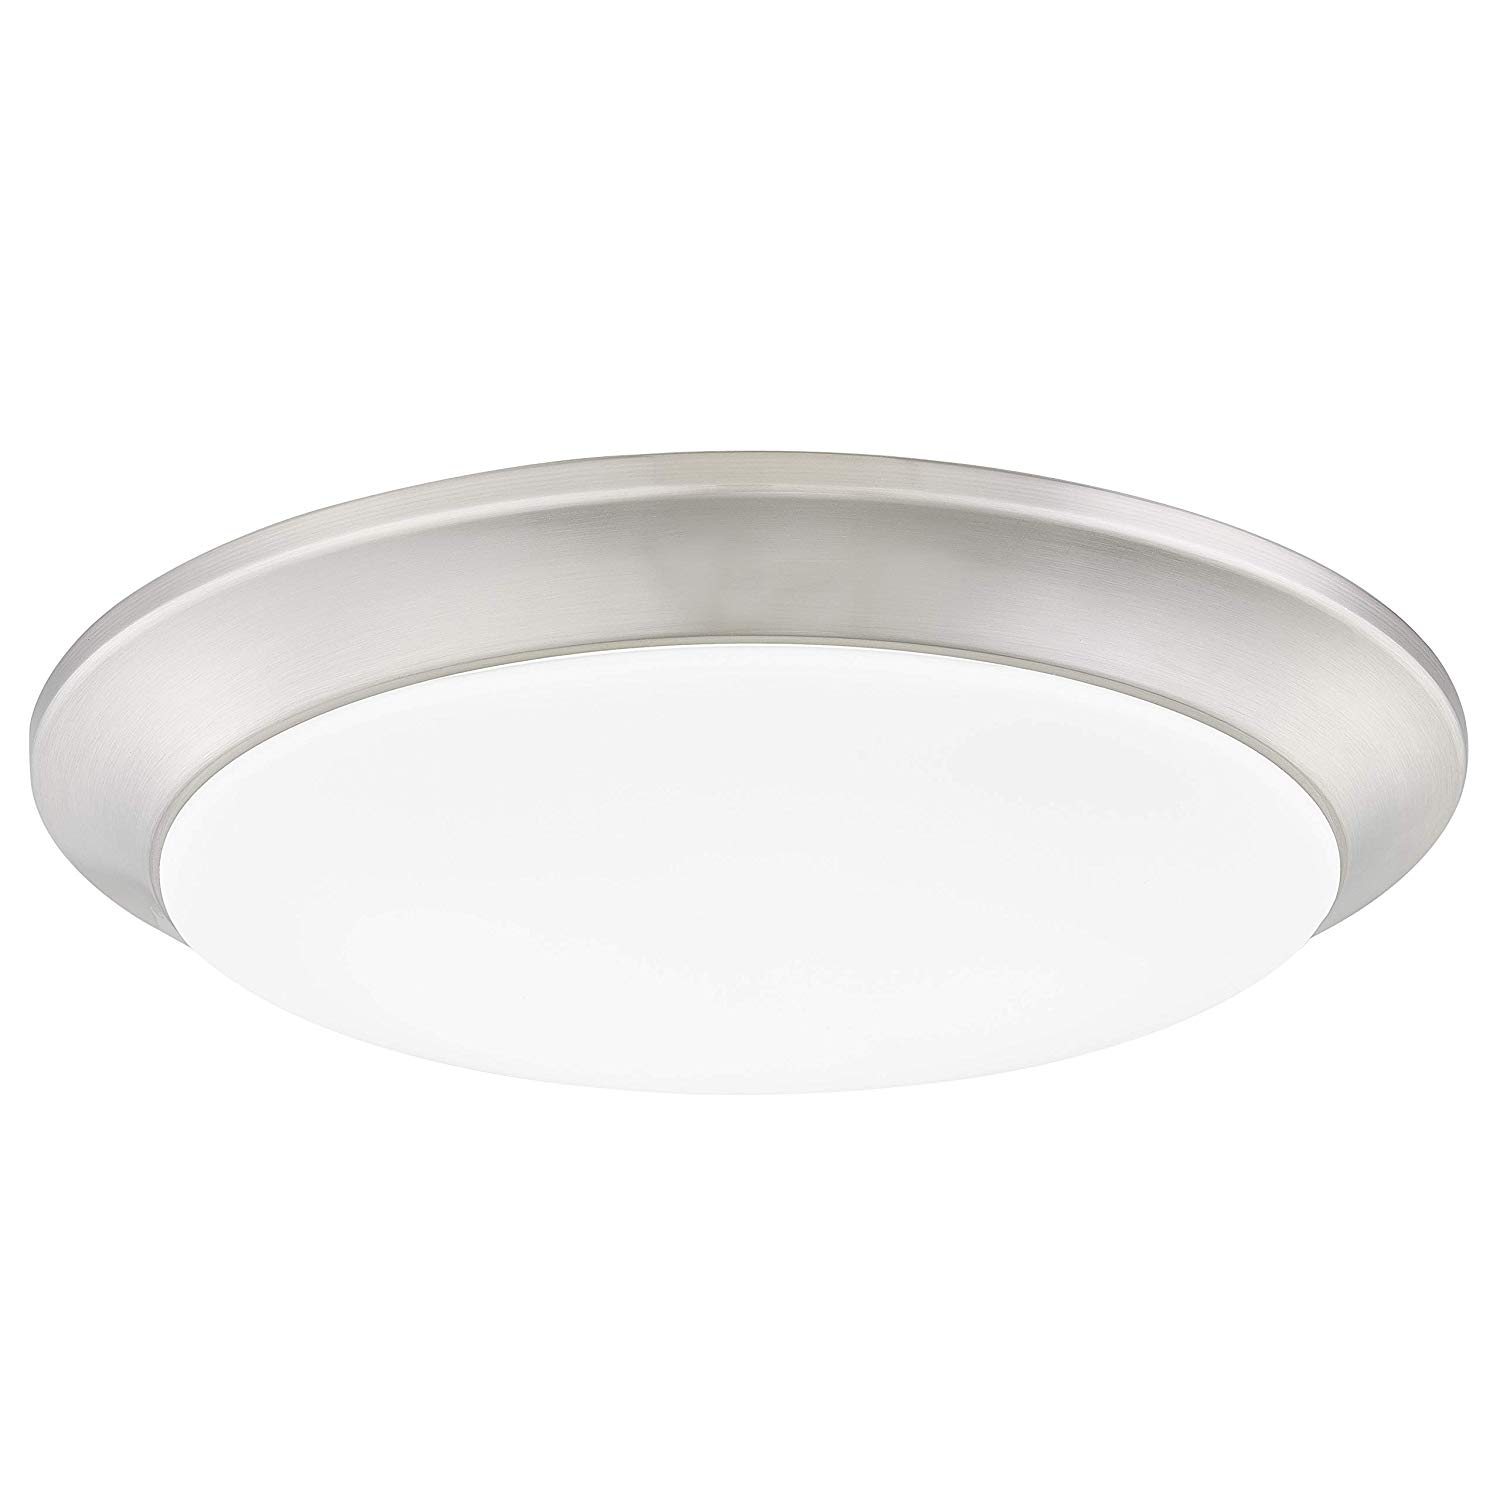 GRUENLICH LED Flush Mount Ceiling Lighting Fixture, 13 Inch Dimmable 22W (150W Replacement) 1360 Lumen, Metal Housing with Nickel Finish, ETL and Damp Location Rated 